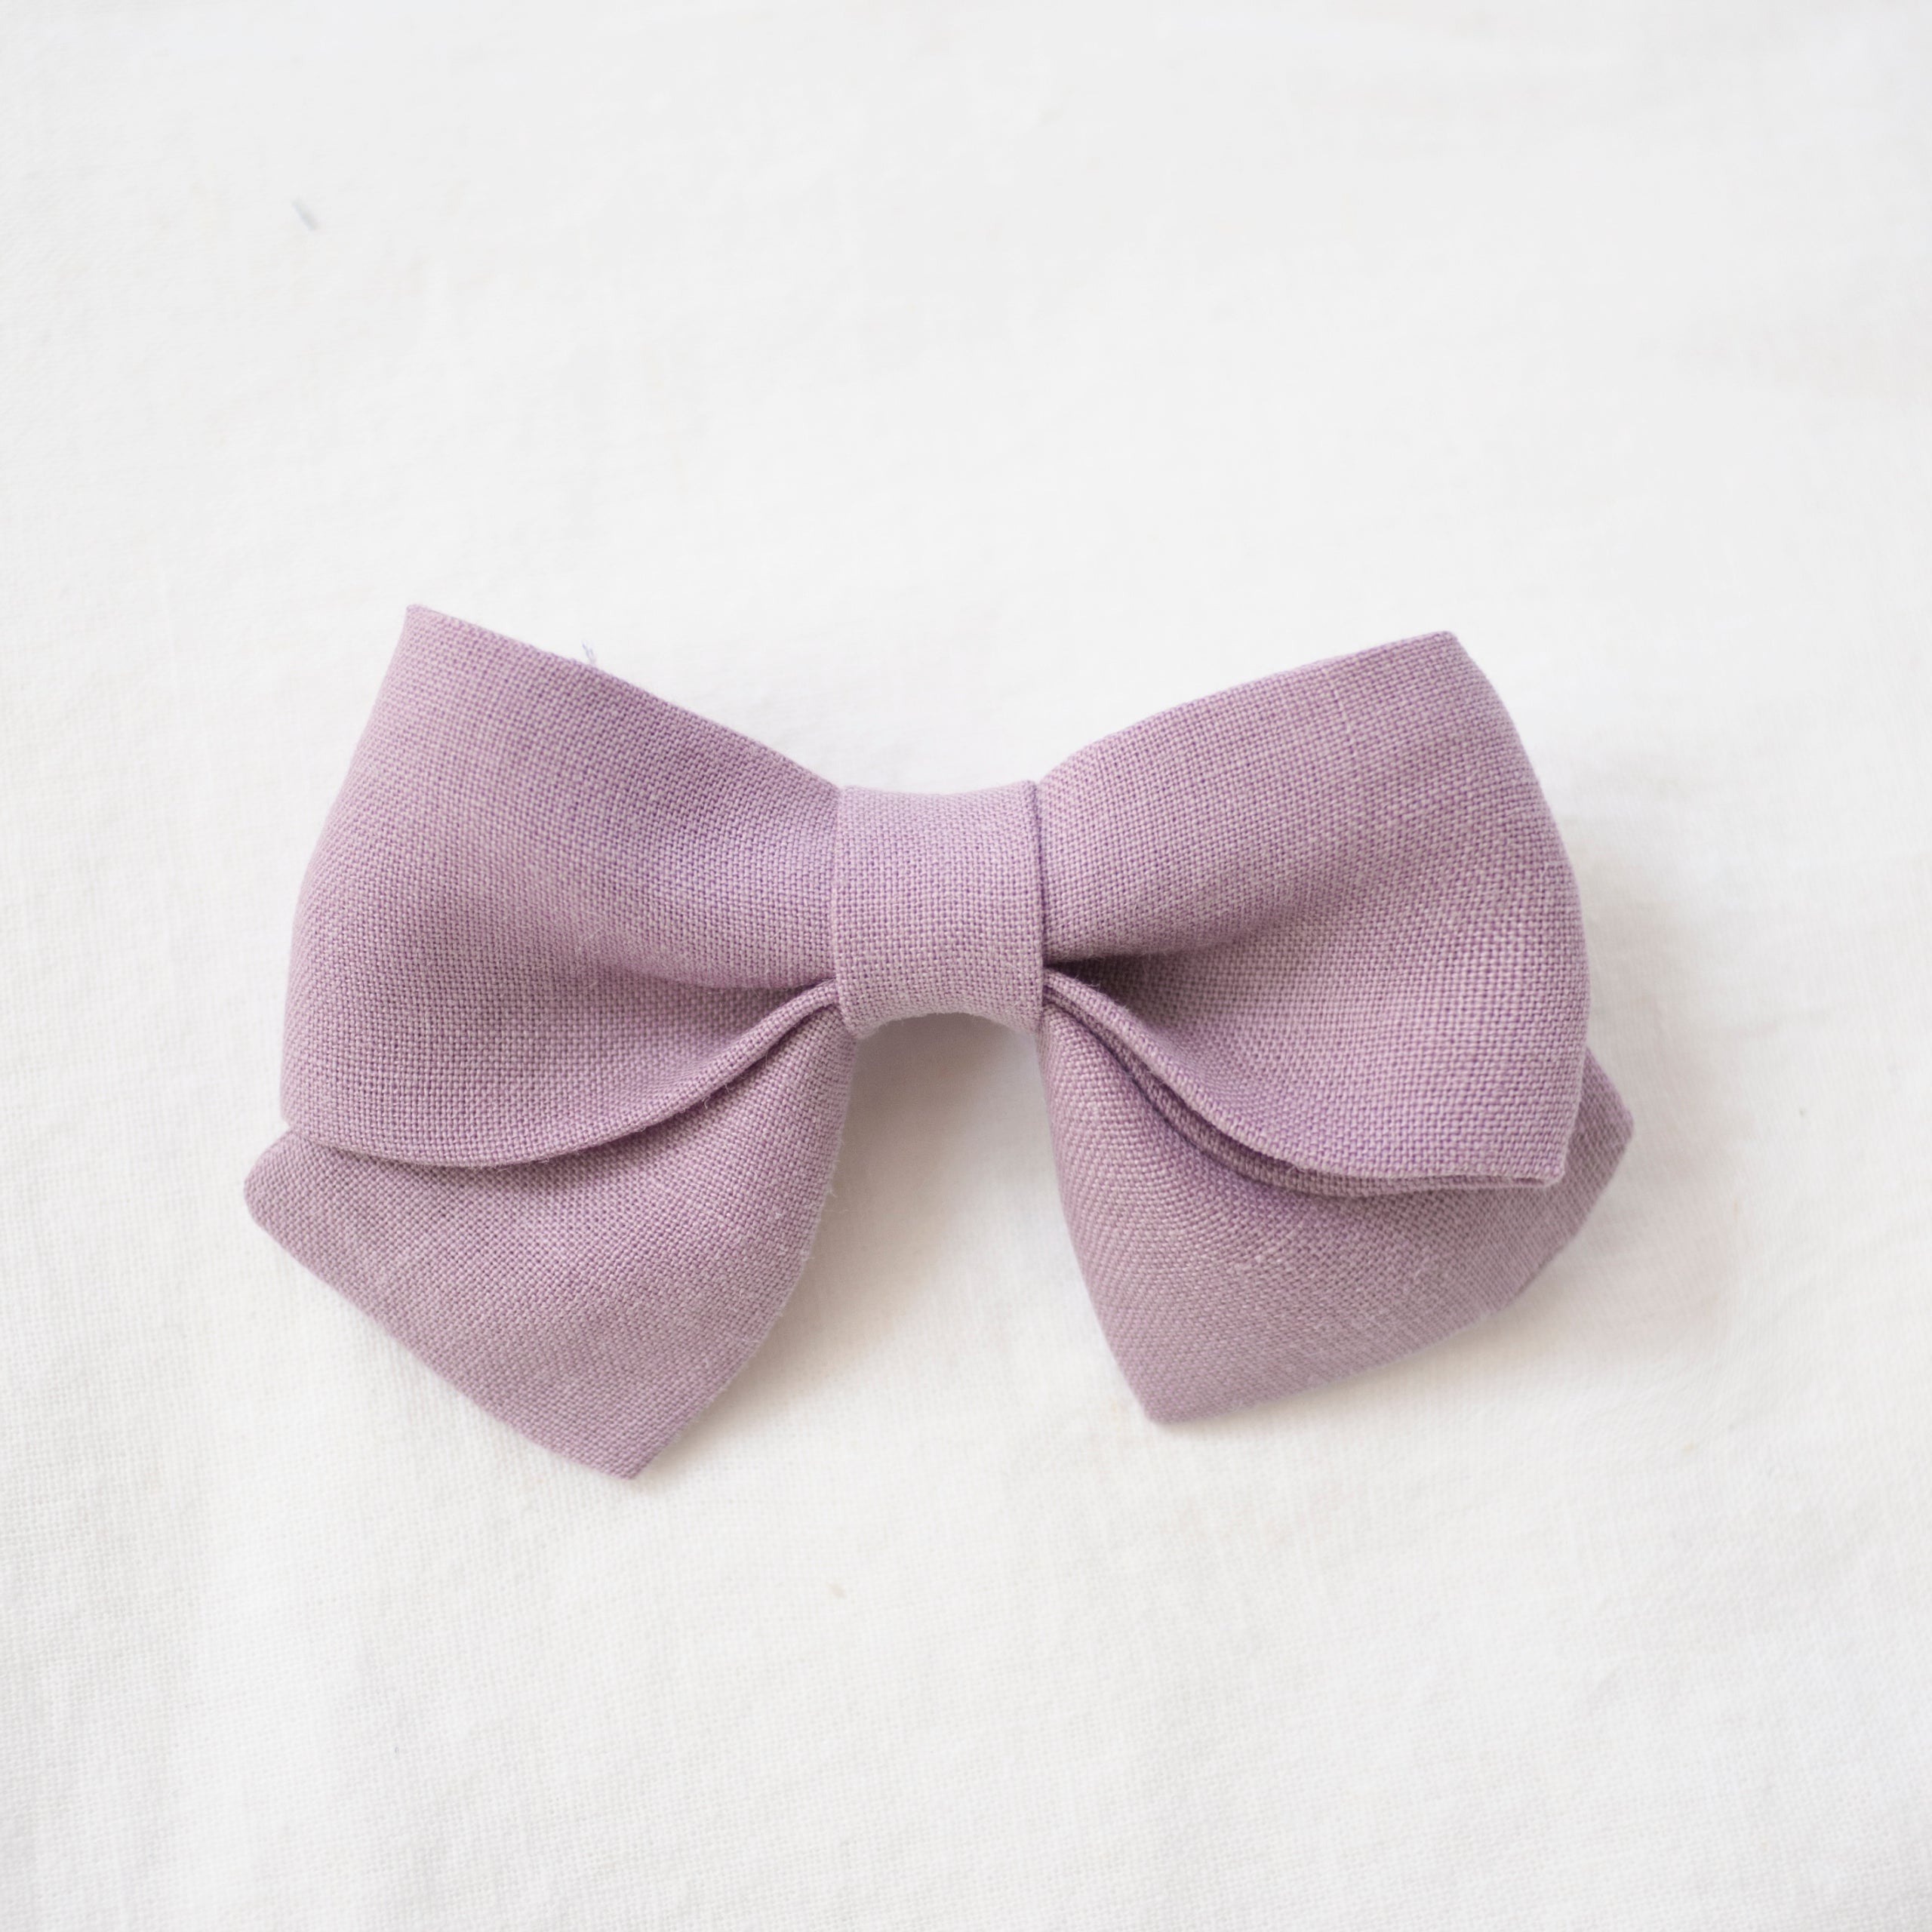 Forget Me Not | Medium Sailor Bow